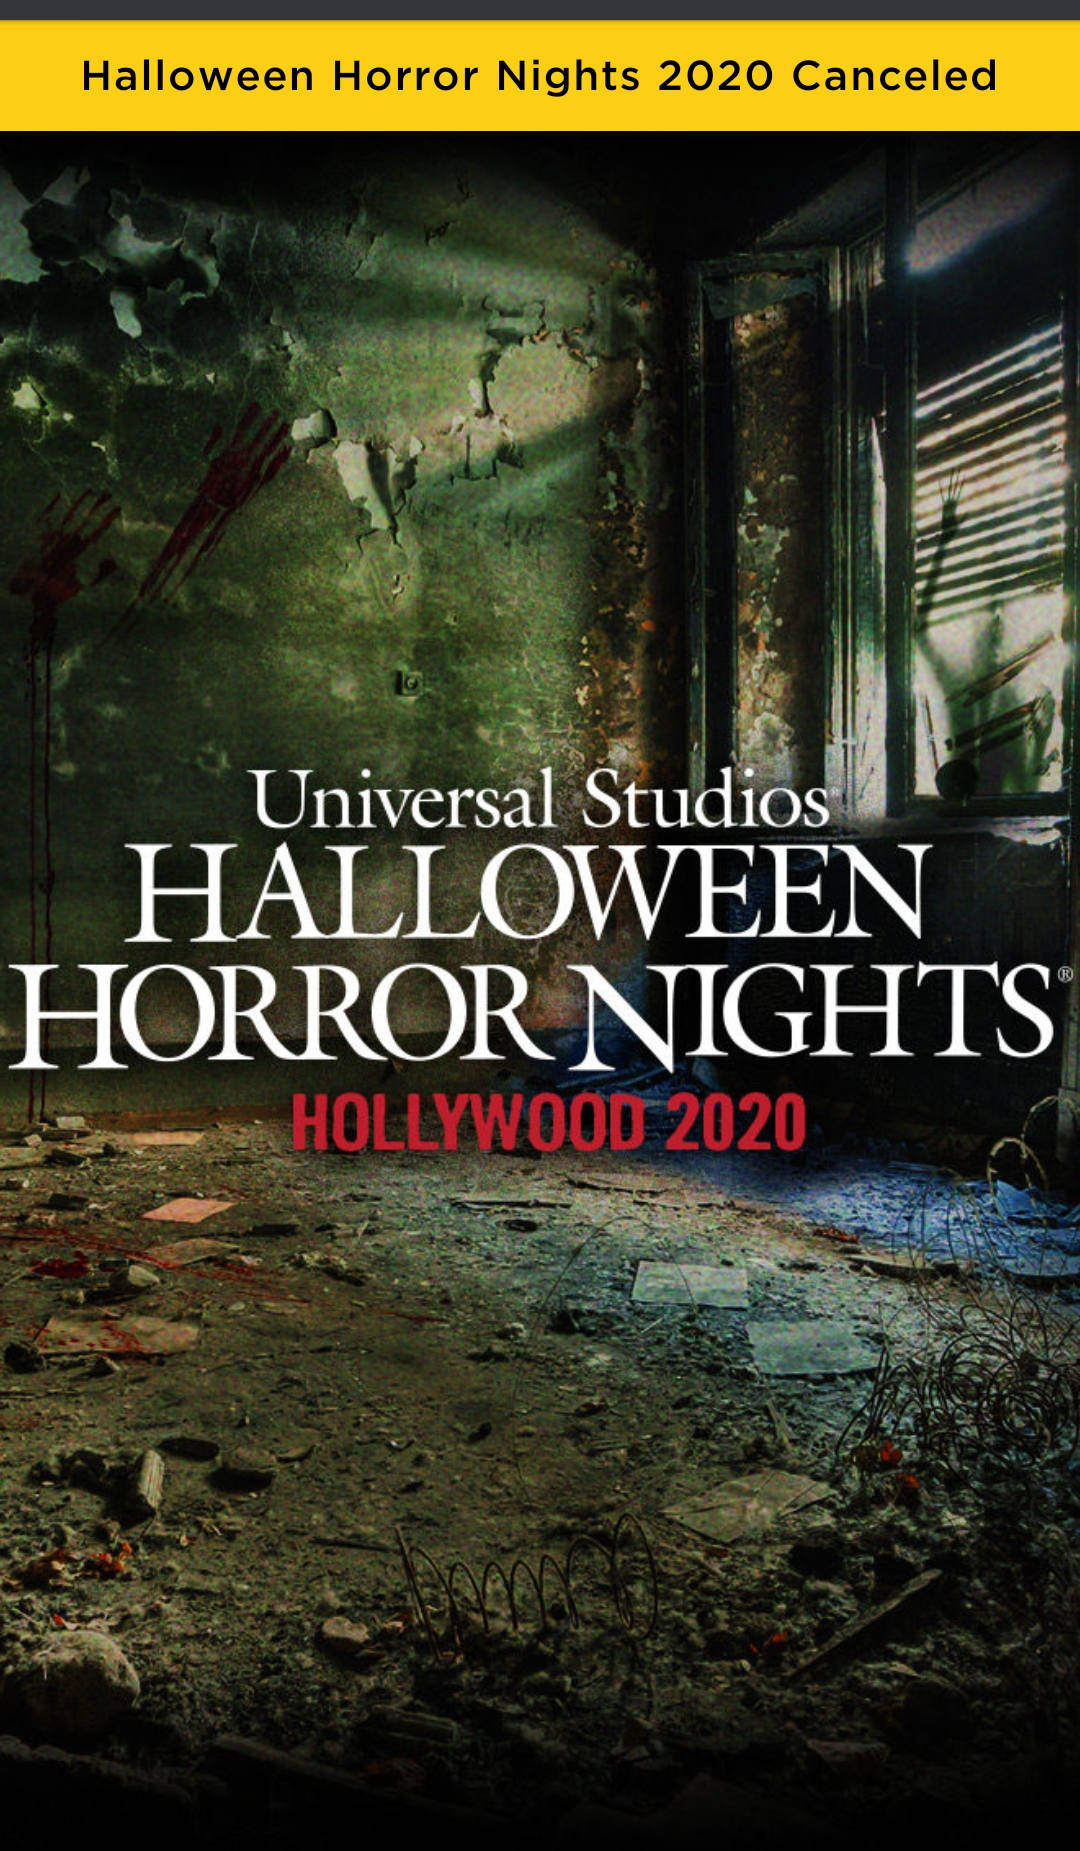 7731Universal Orlando has canceled Halloween Horror Nights for this year 2020.